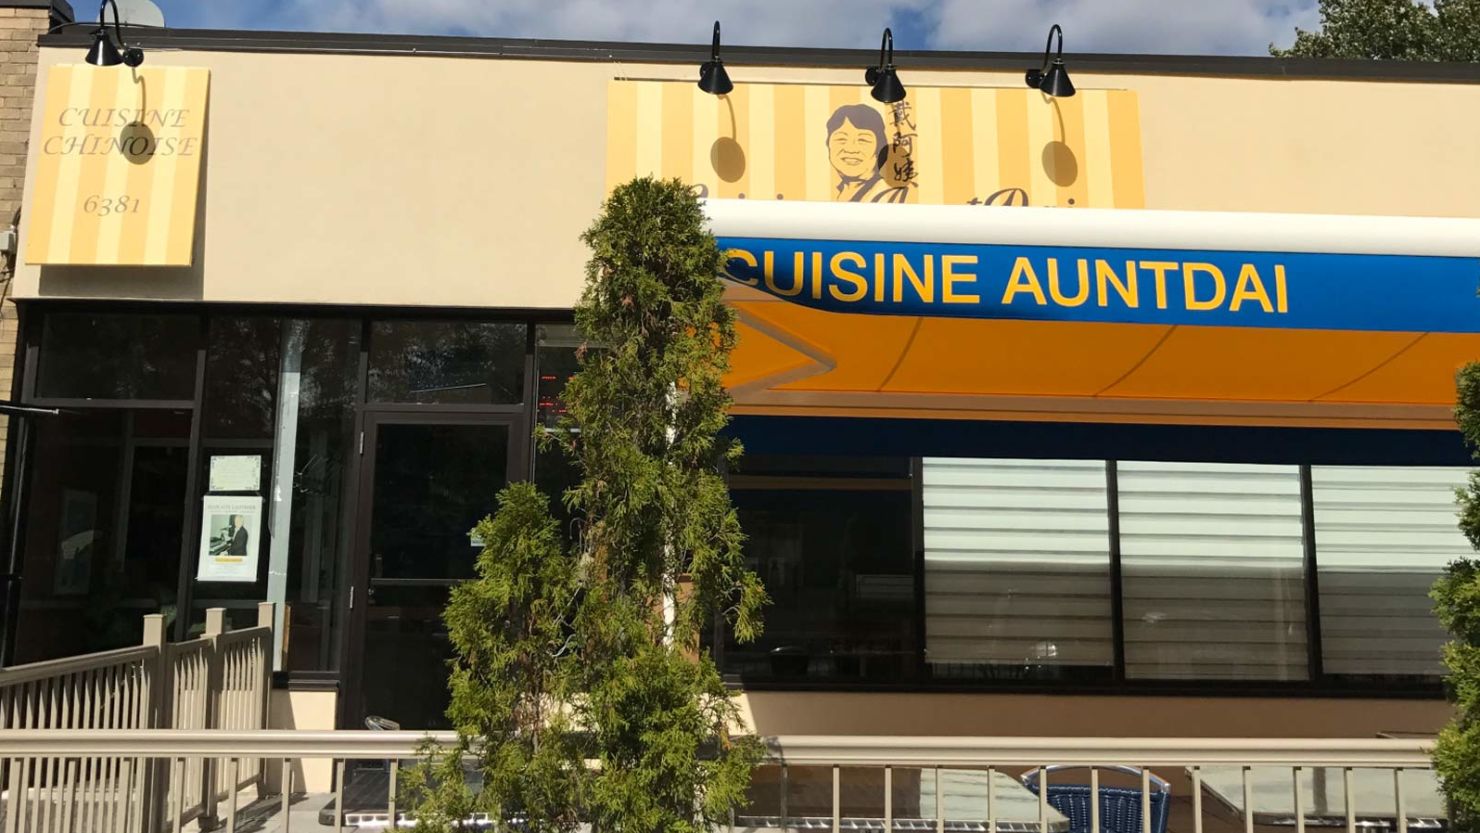 Cuisine AuntDai in Montreal has seen a rise in customers after the owner's honest descriptions of dishes went viral.